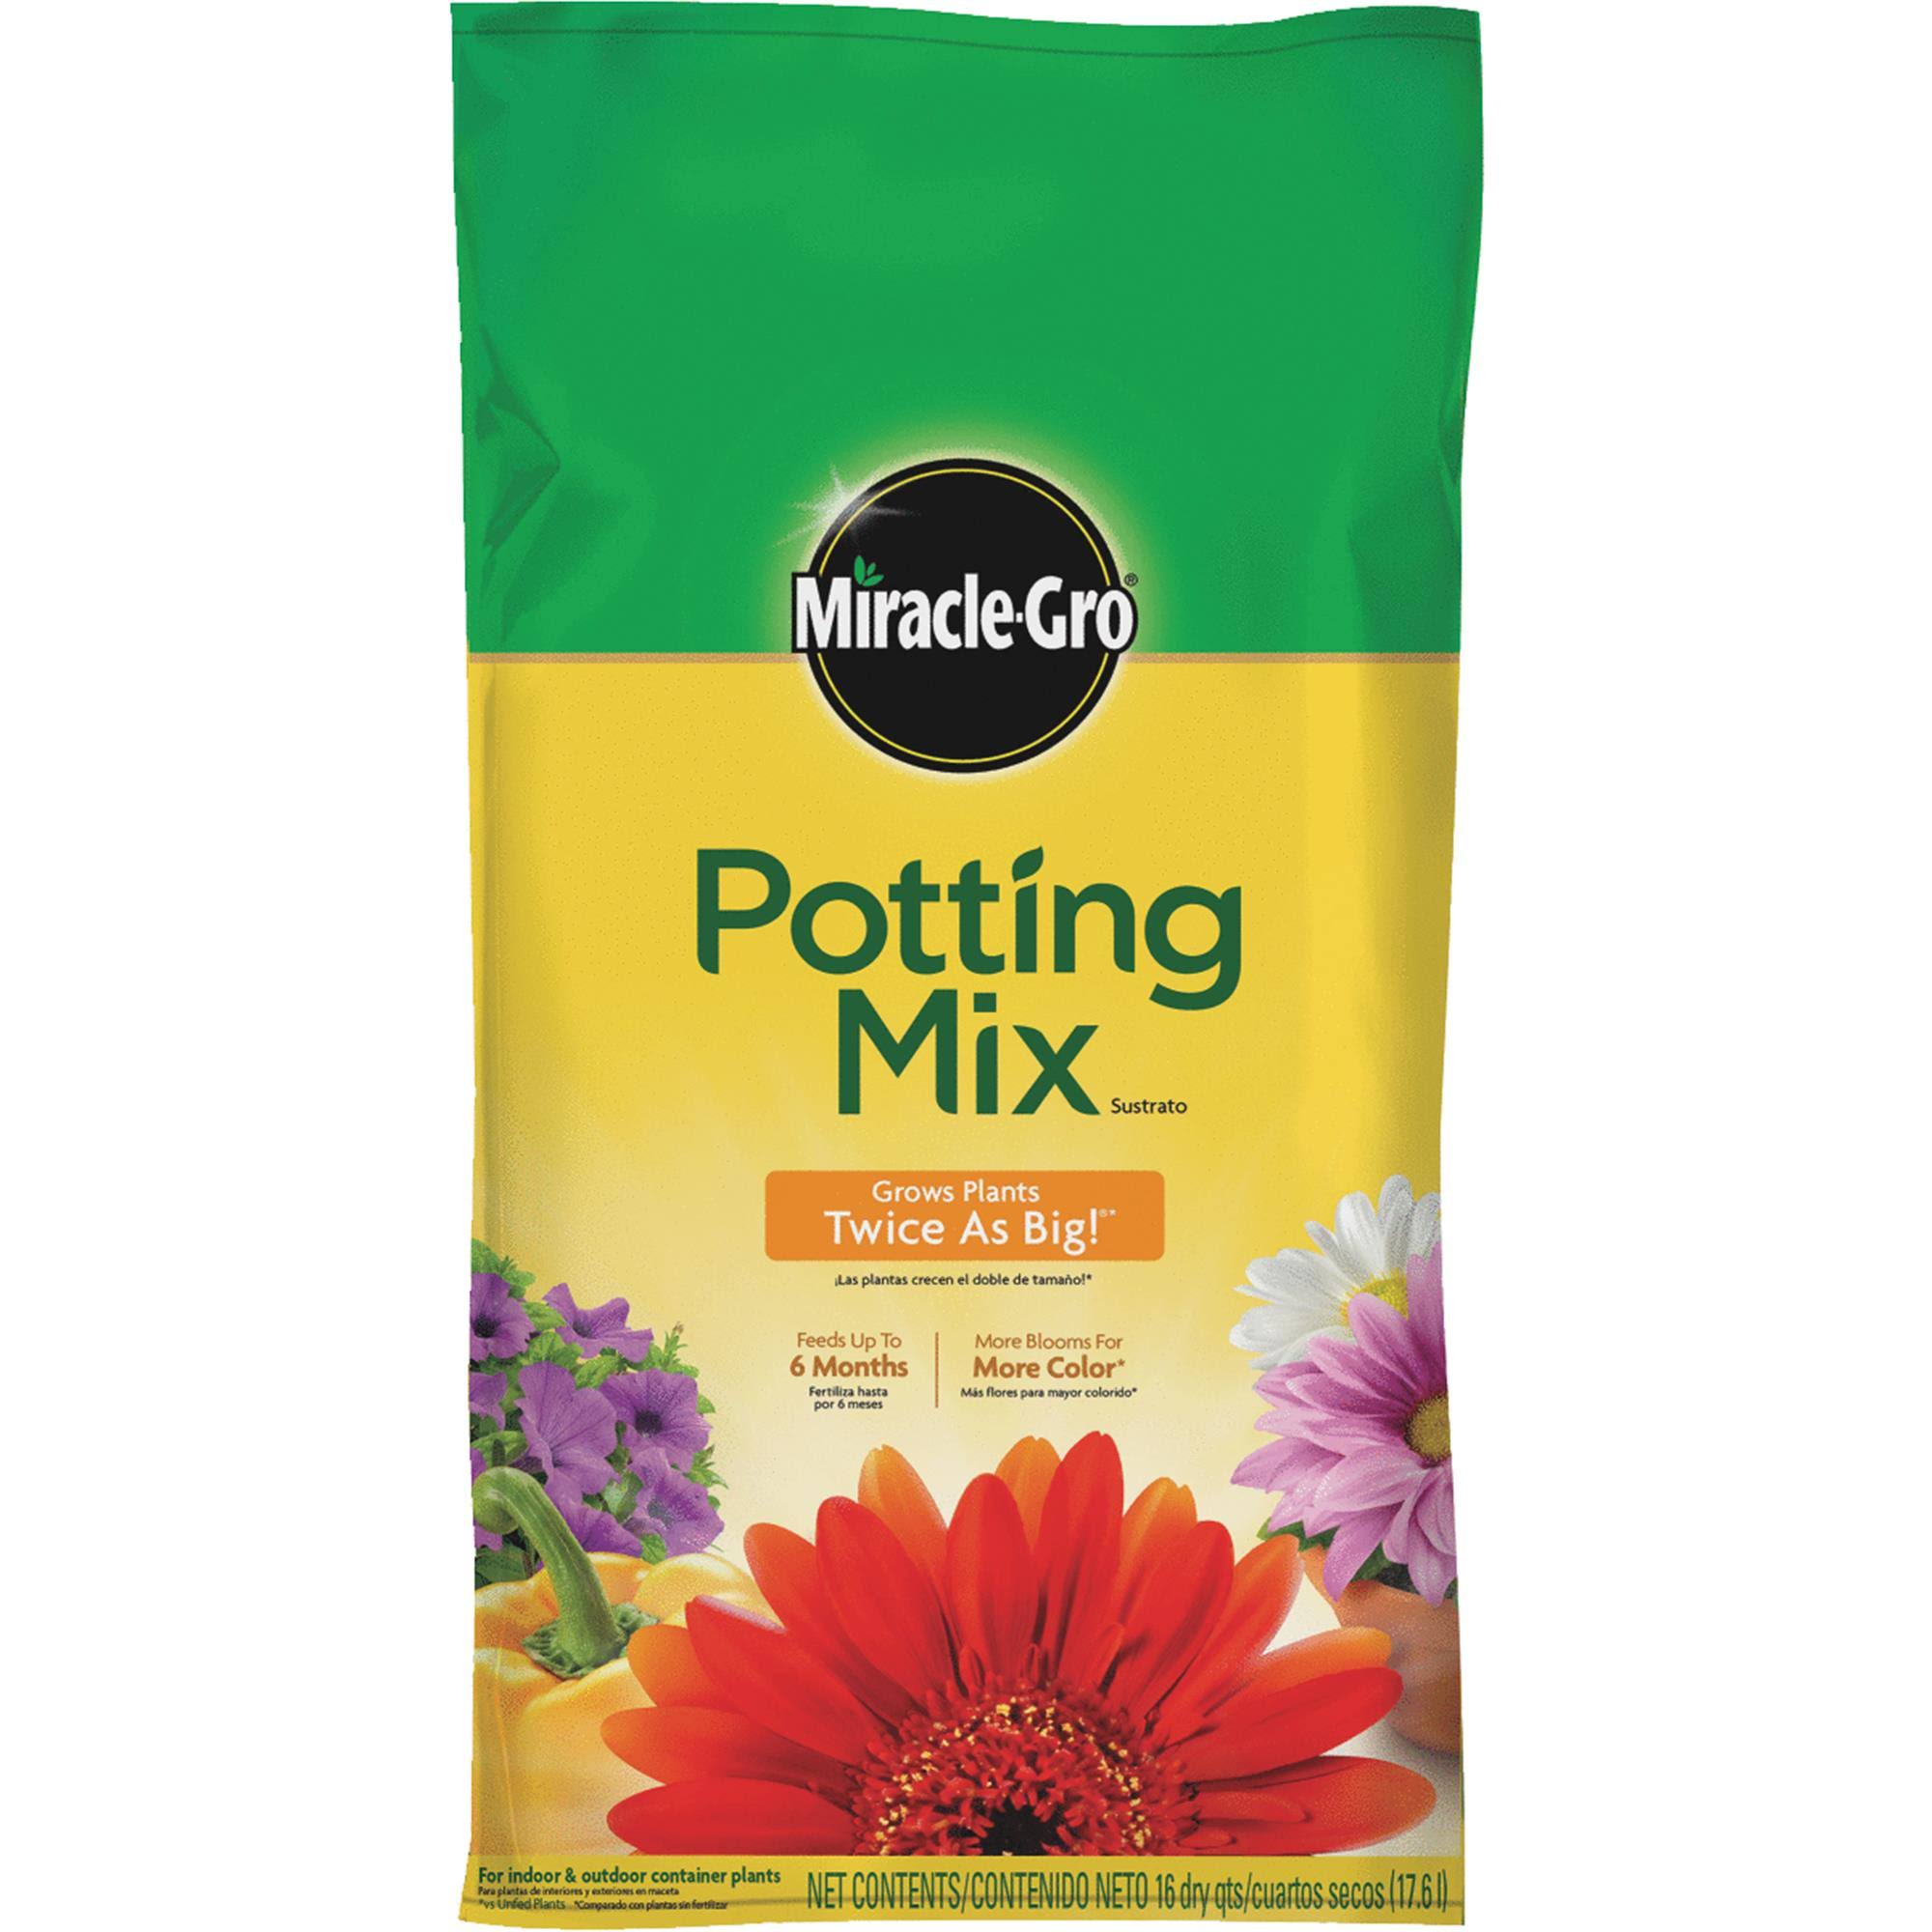 Scotts Lawn Care Miracle Gro Potting Mix